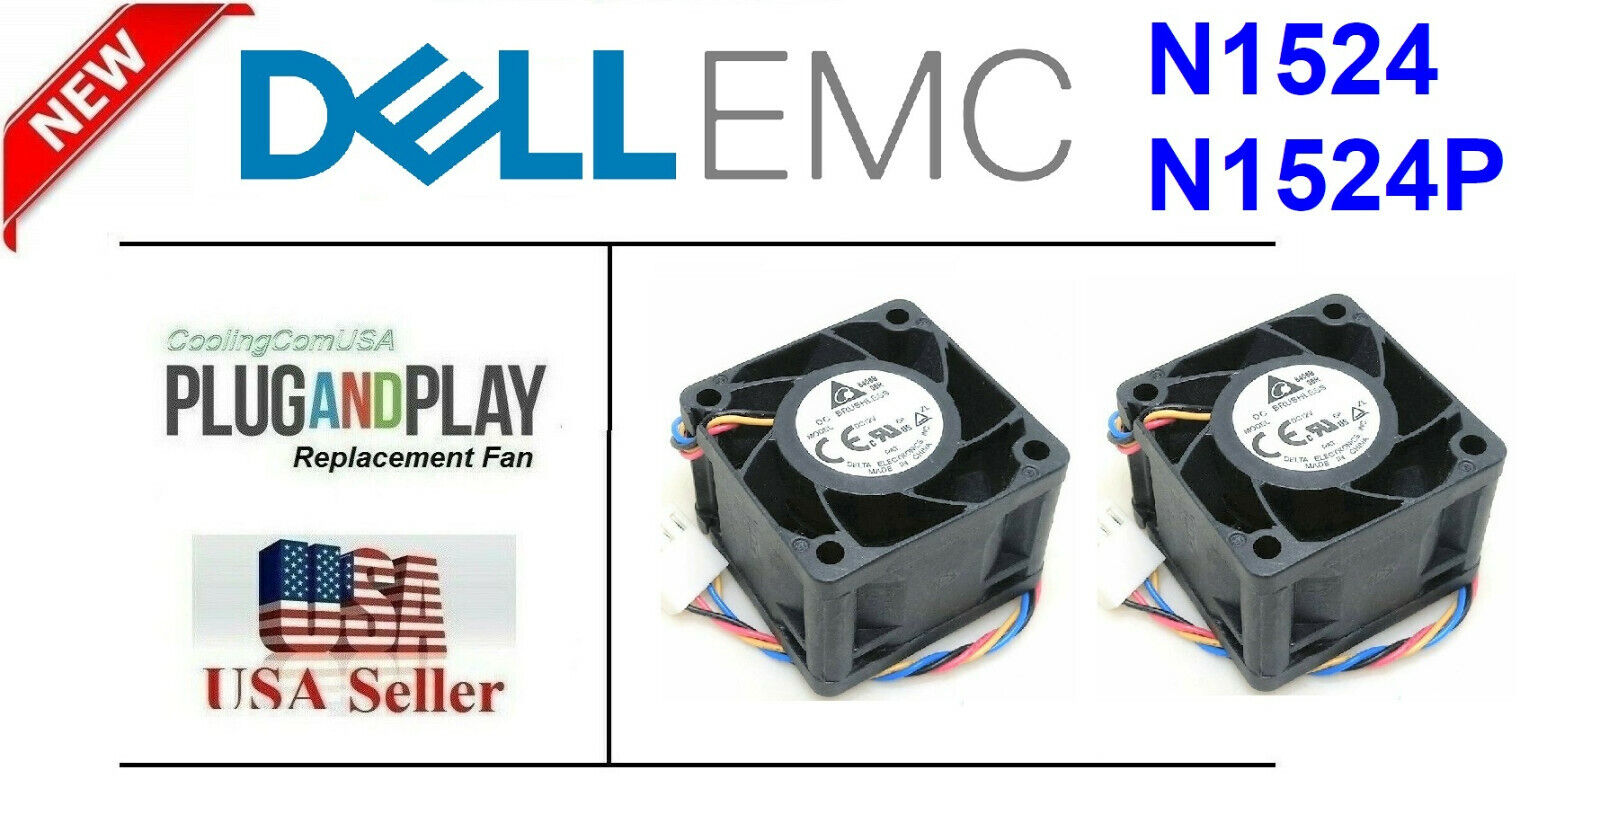 2x New Replacement Fans for Dell EMC PowerSwitch N1524 N1524P Fan